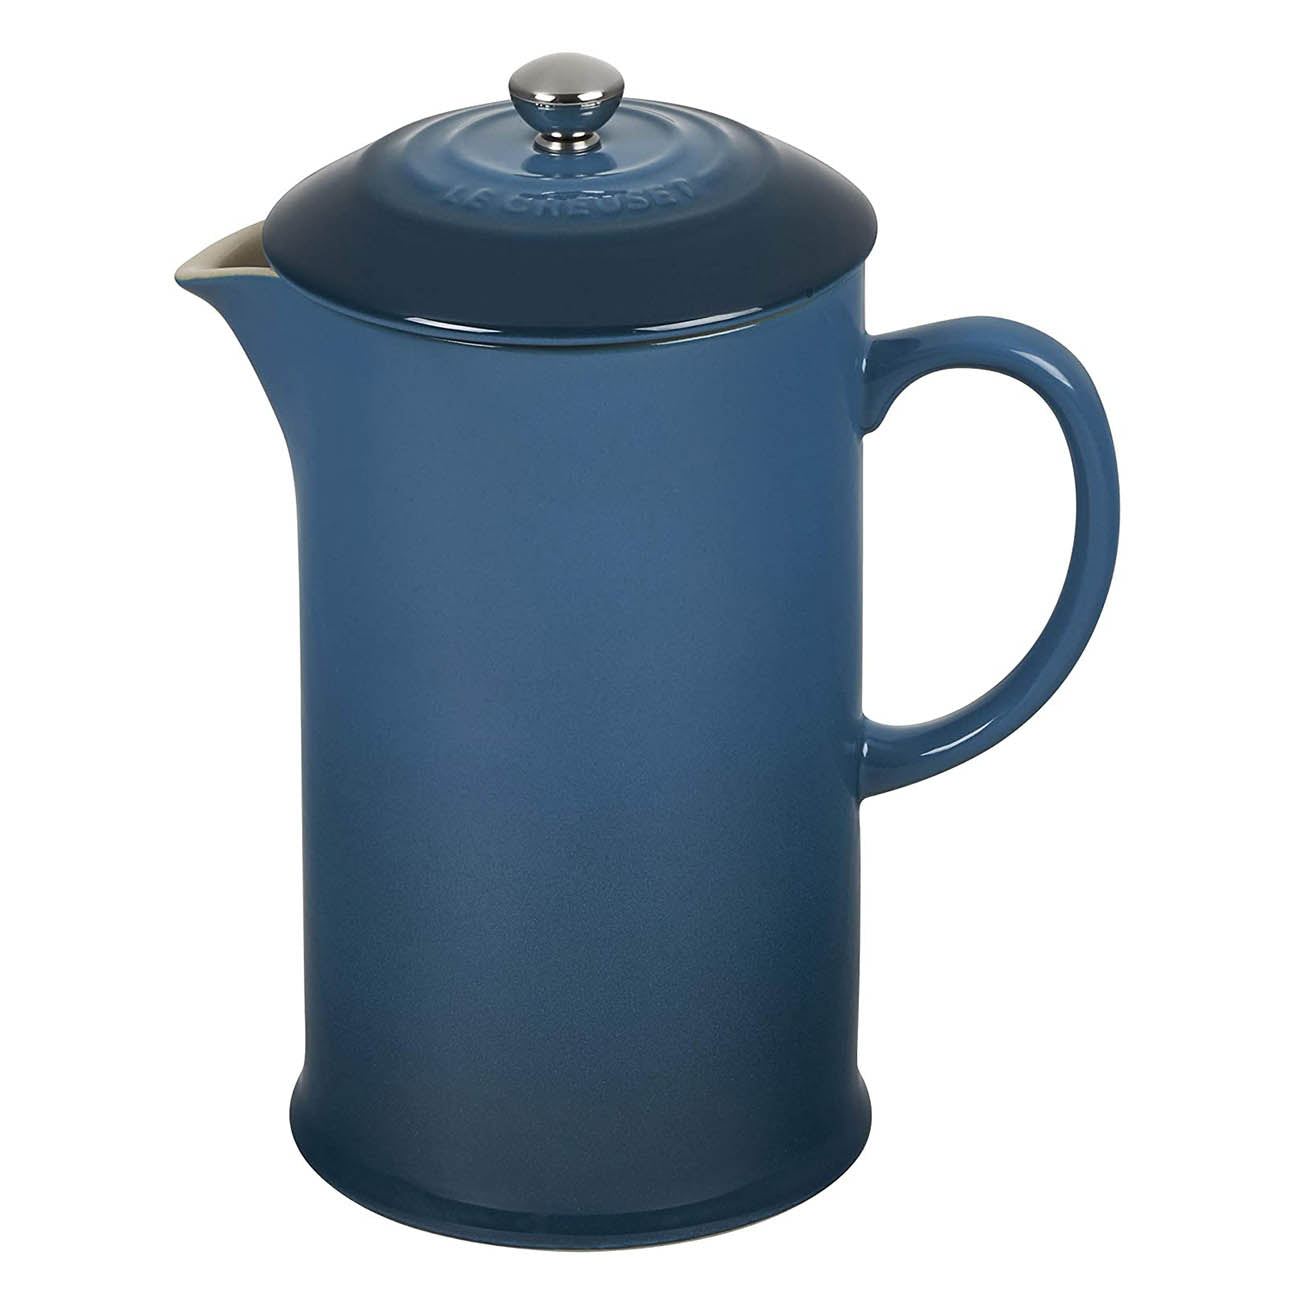 Le Creuset French Press (deep Teal)